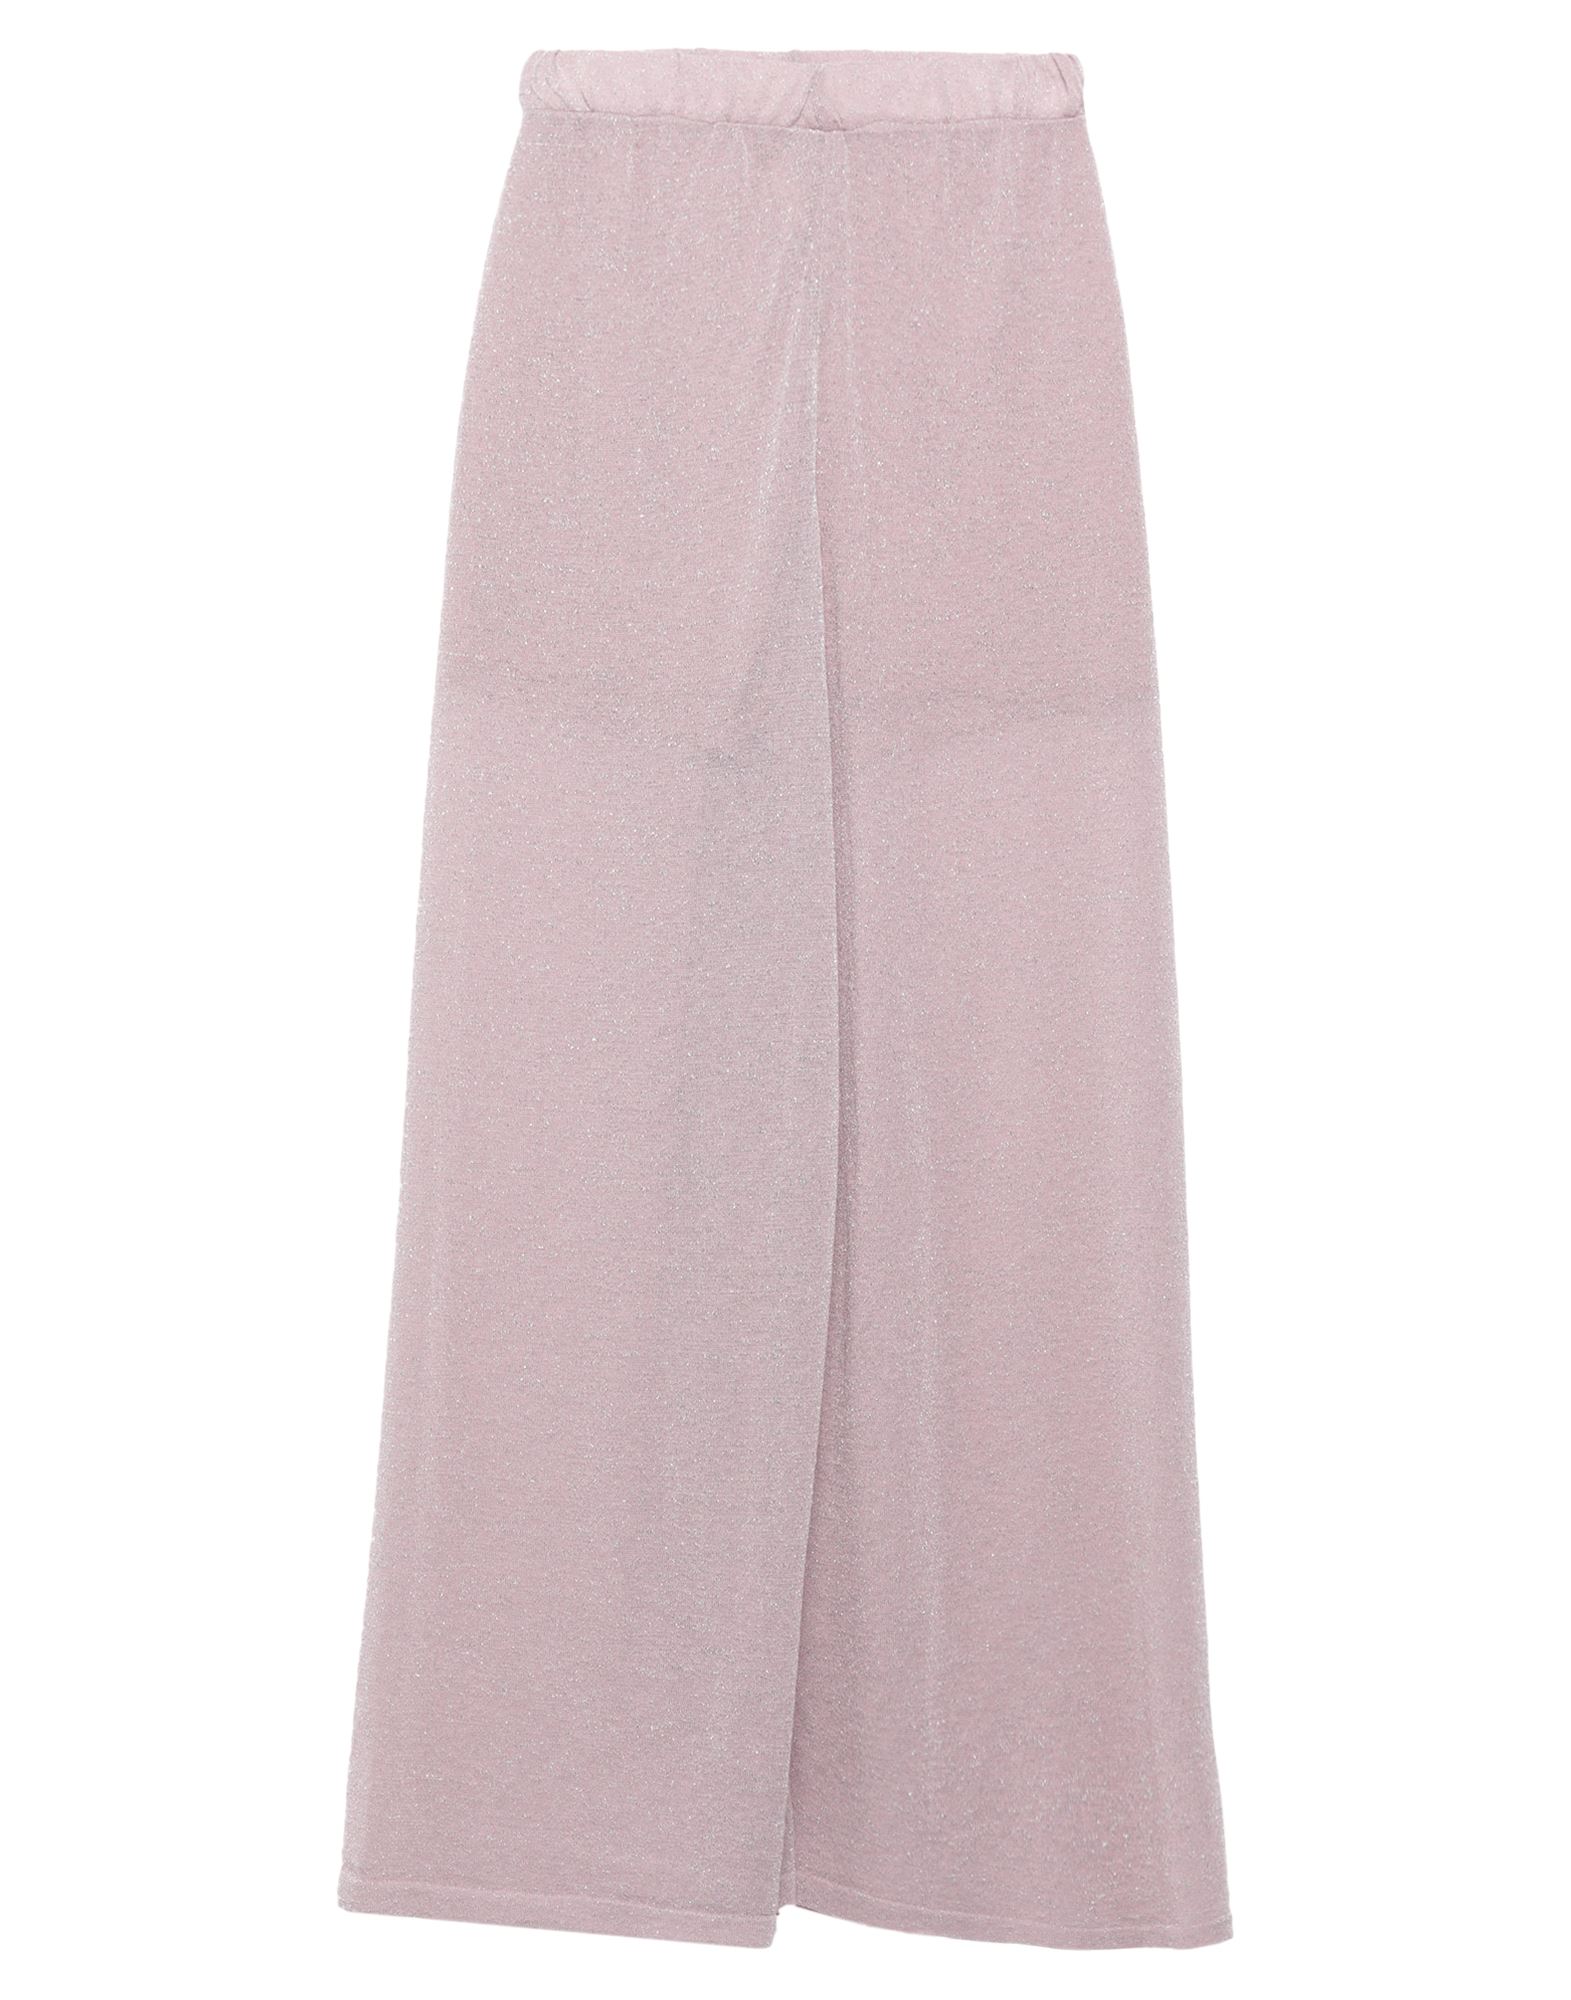 Anonyme Designers Pants In Pink